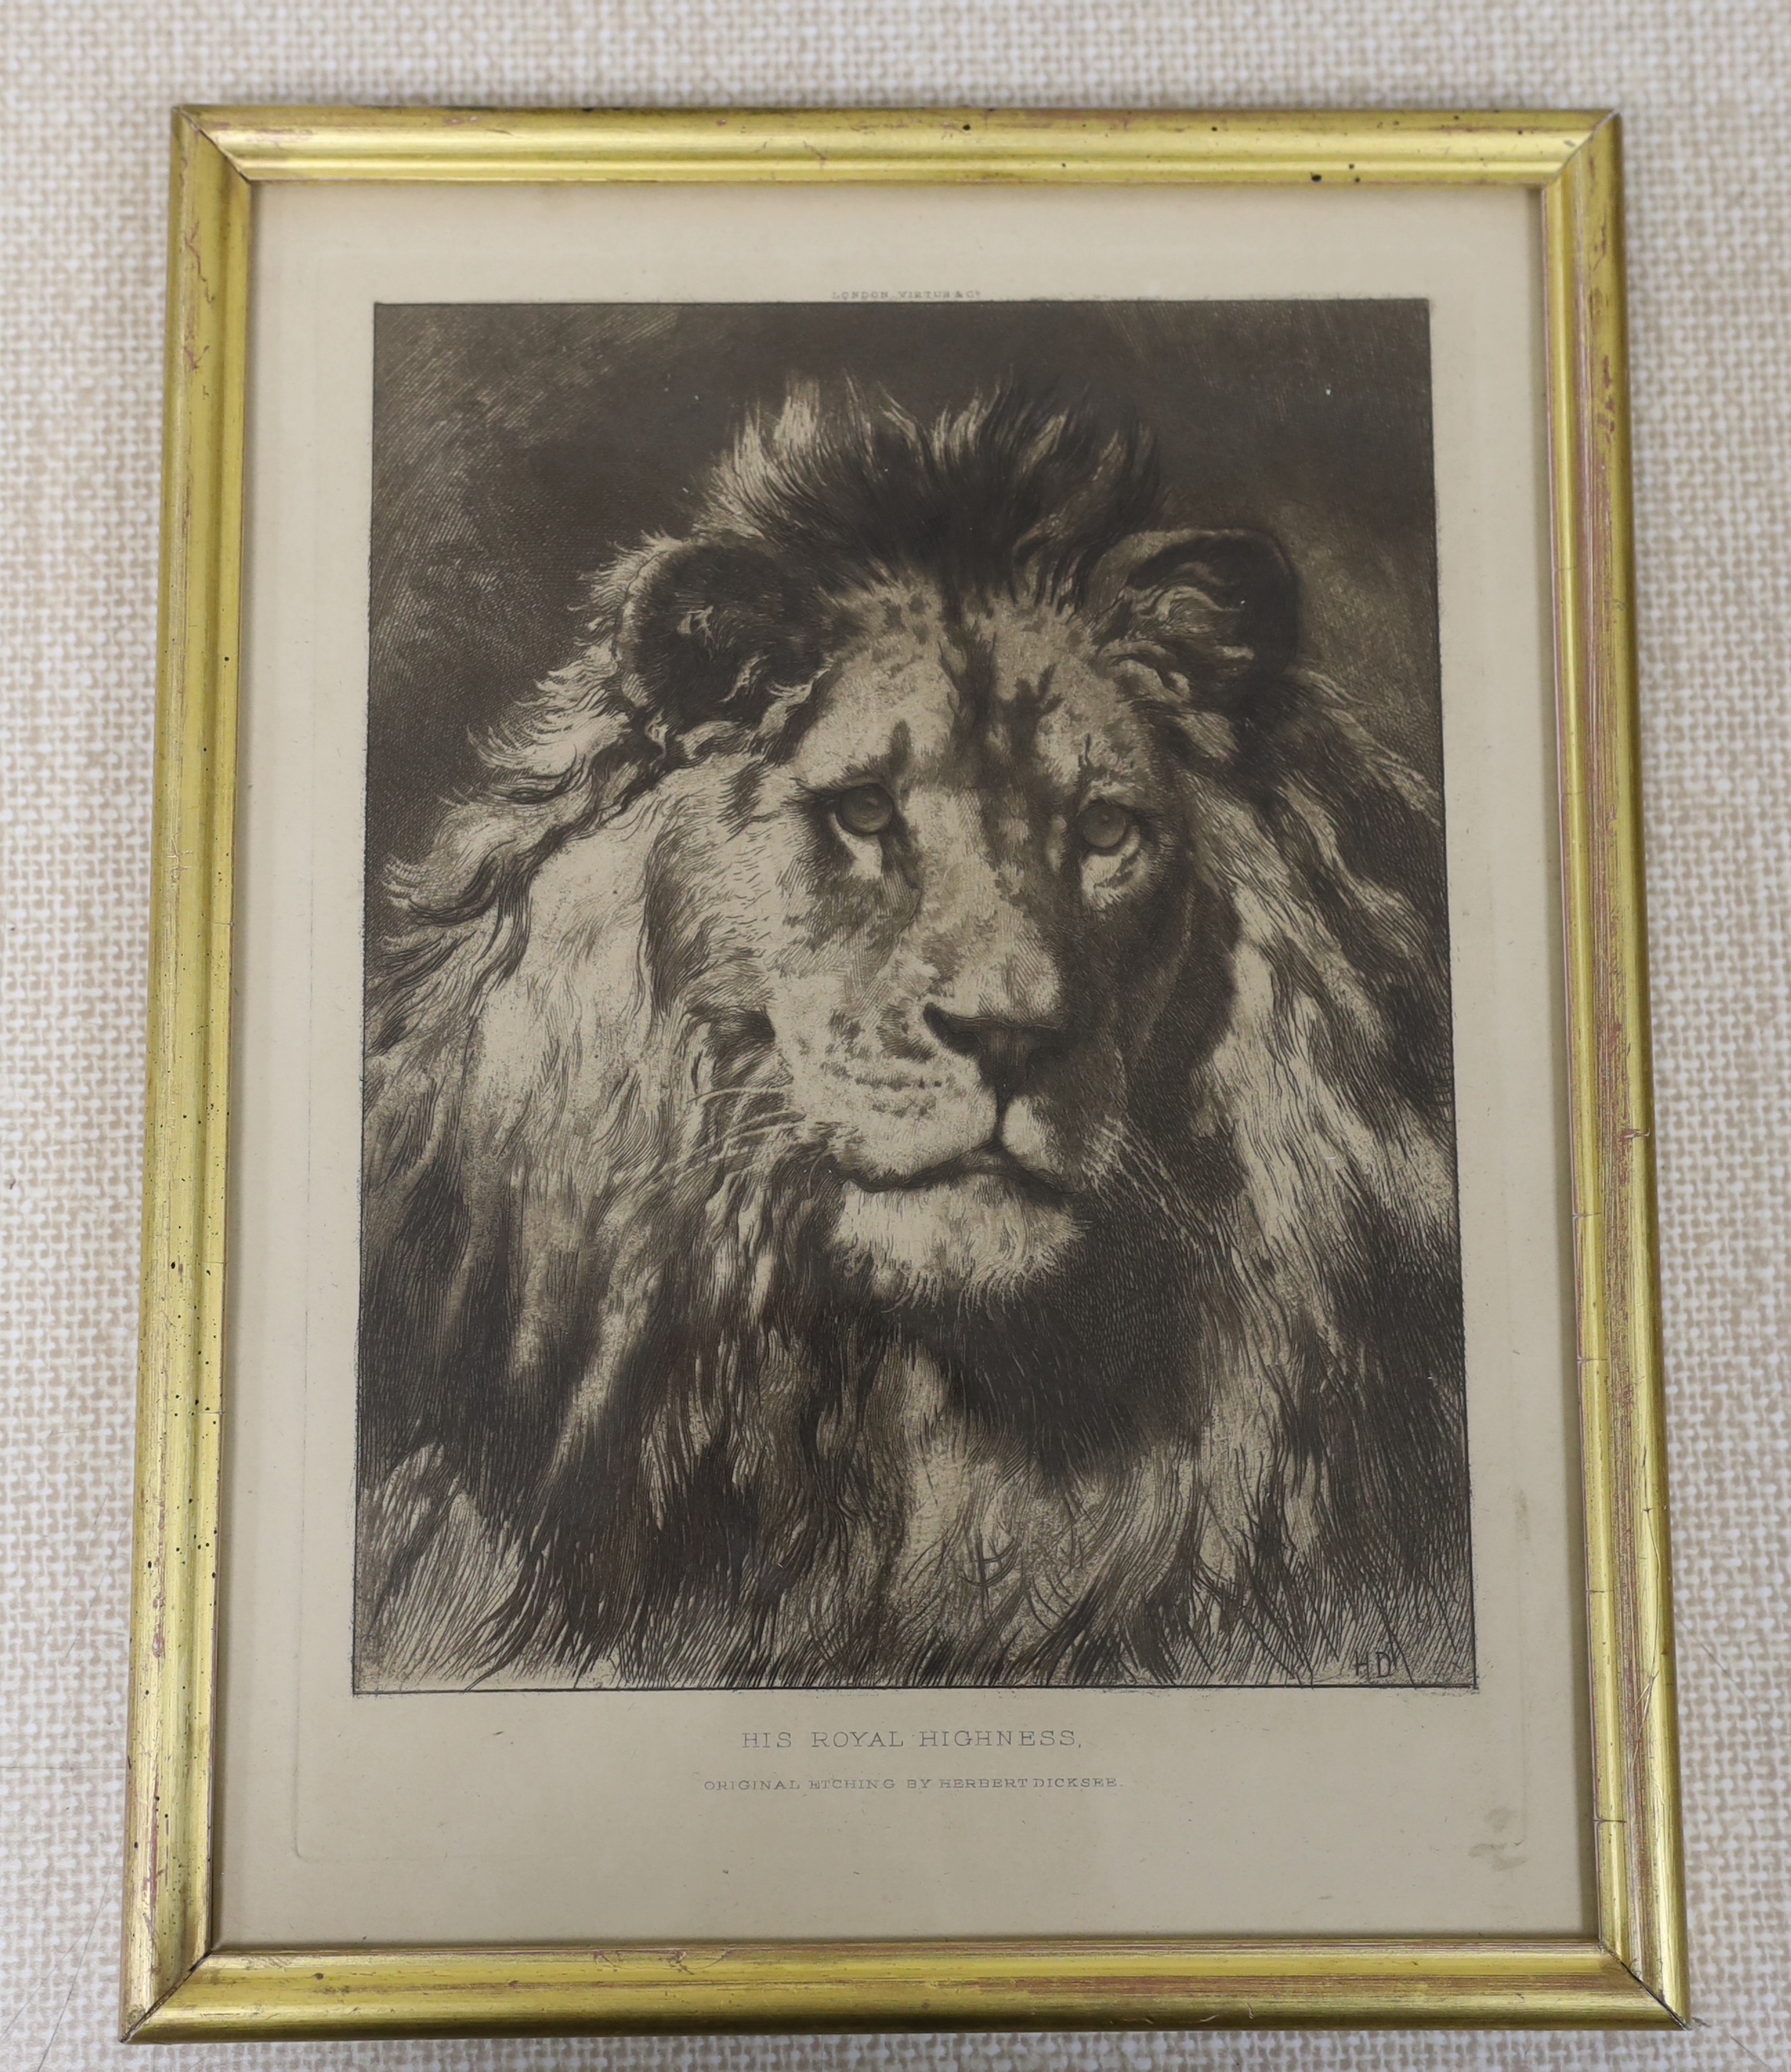 After Herbert Thomas Dicksee (1862-1942) etching, 'His Royal Highness', publ. London Virtue and Co, 29 x 22cm